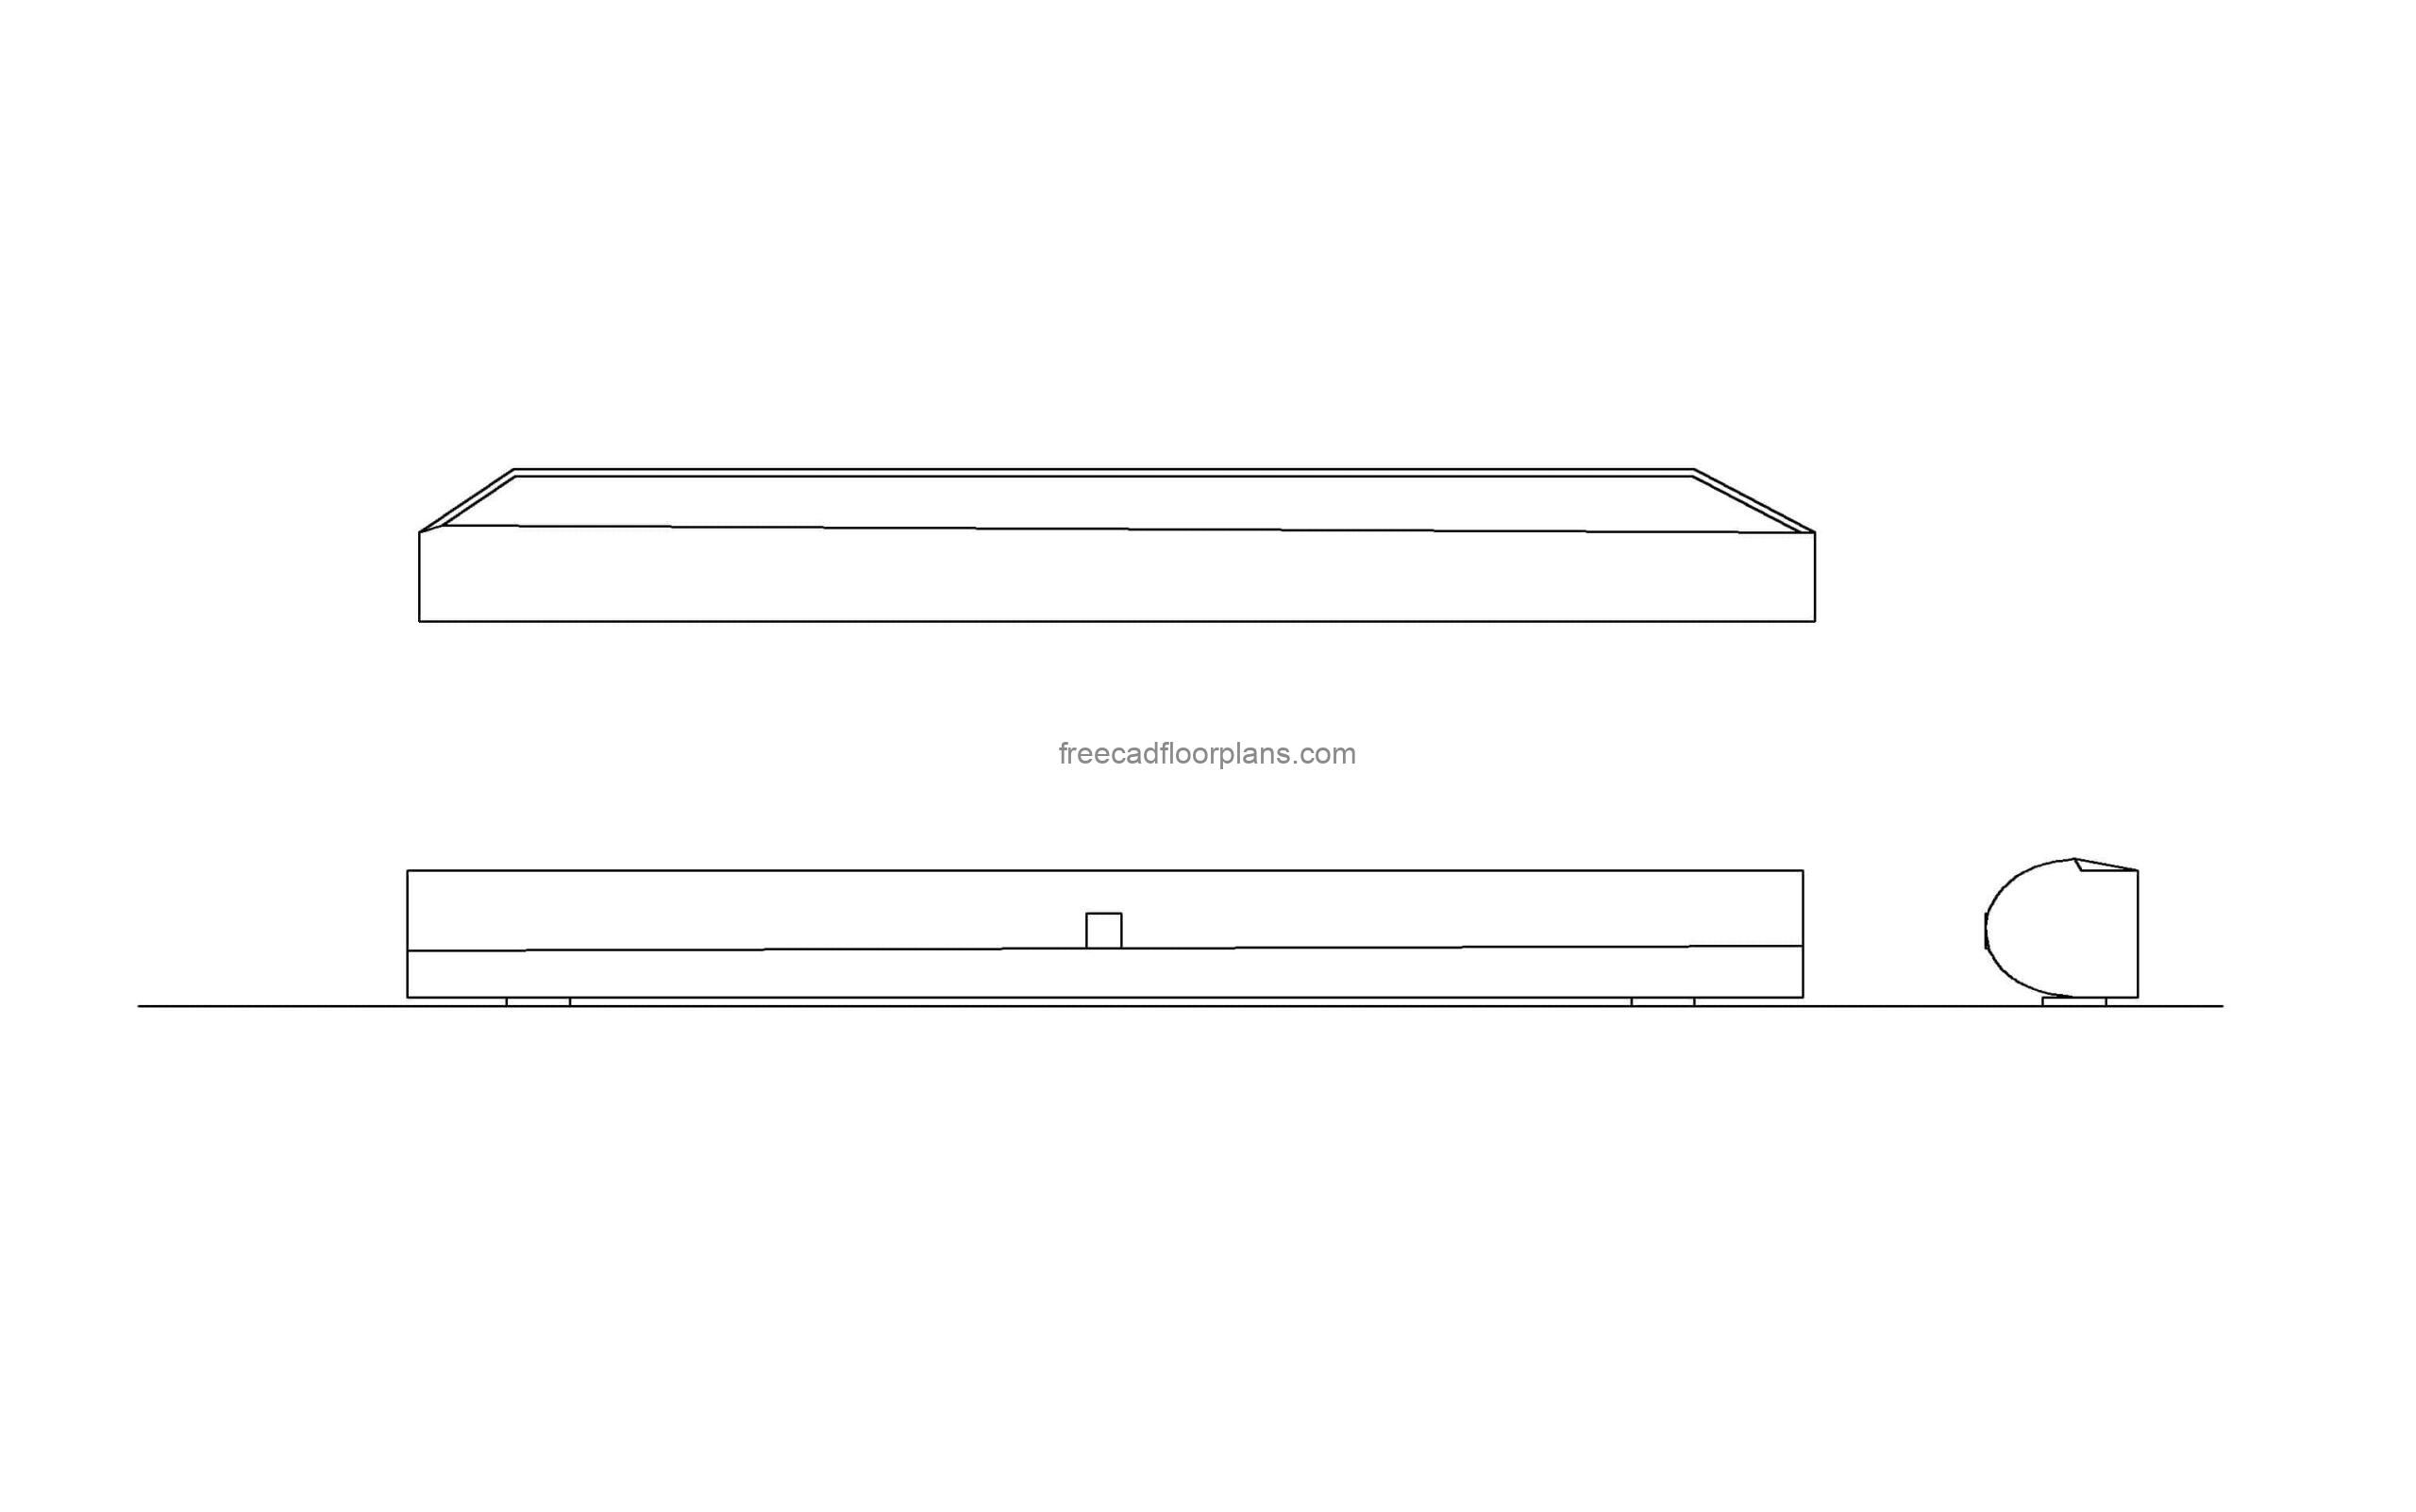 autocad drawing of a jbl soundbar plan and elevation 2d views dwg file for free download